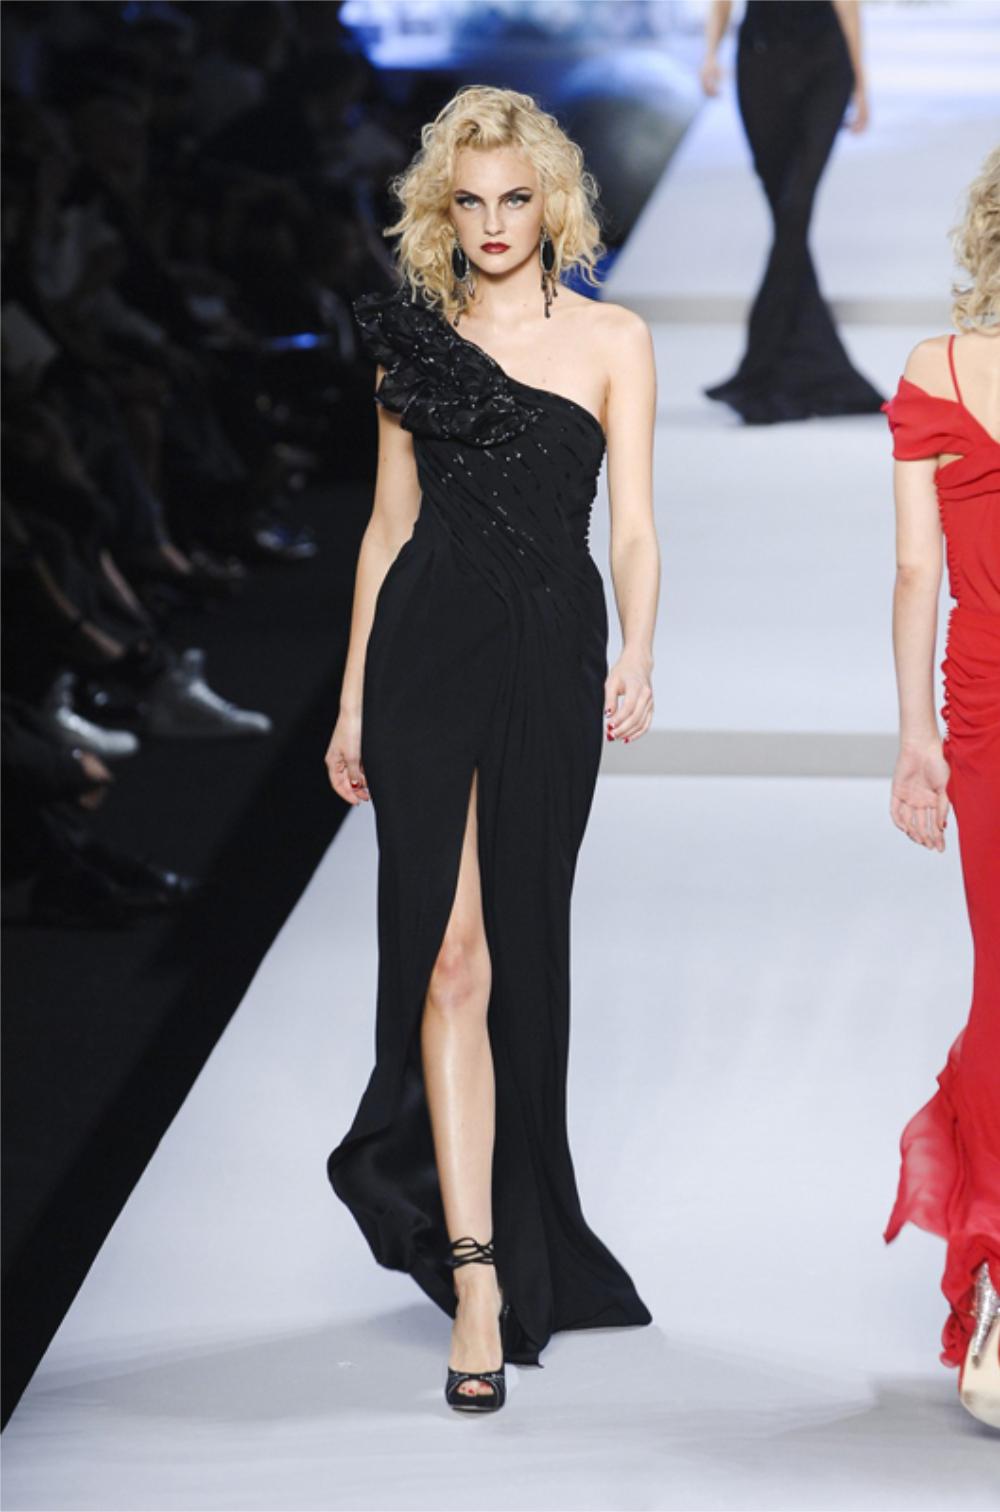 An incredibly chic and well-documented Christian Dior black beaded calla lilies one-shoulder silk bias cut gown. This highly coveted Christian Dior treasure from John Galliano's 2008 spring-summer collection is a perfect example of his genius. Vogue